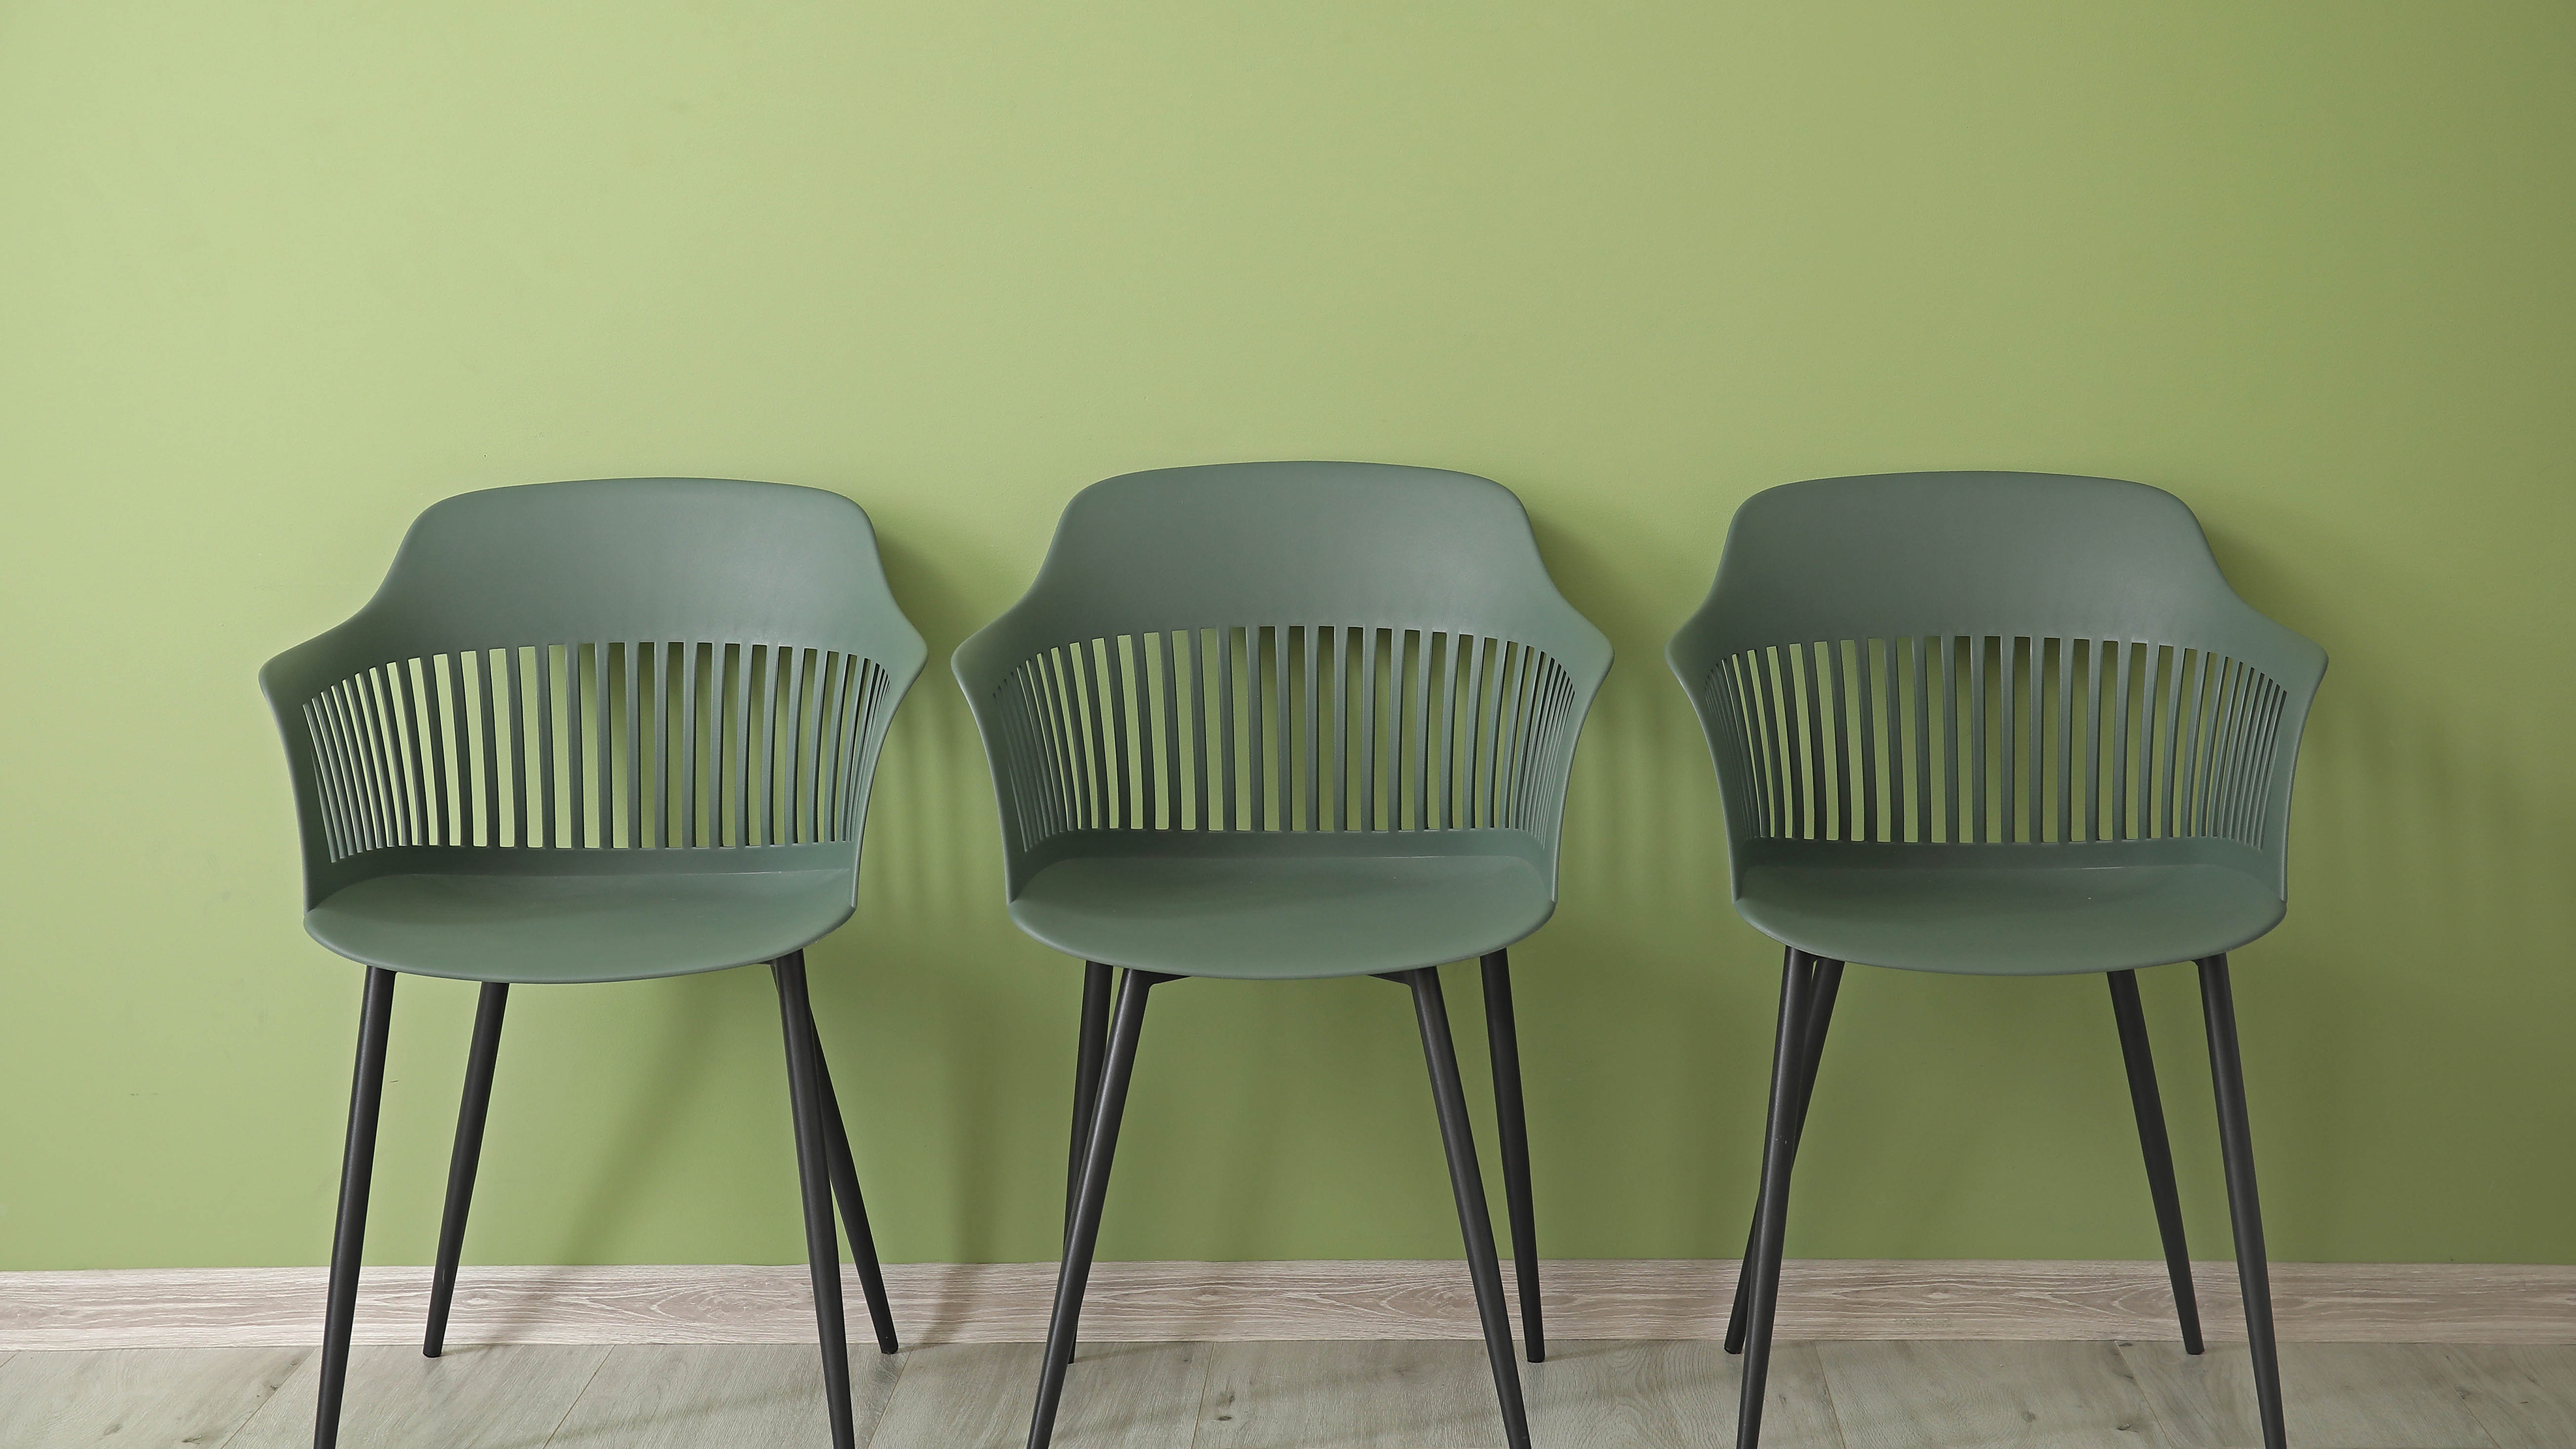 Green wall and chairs